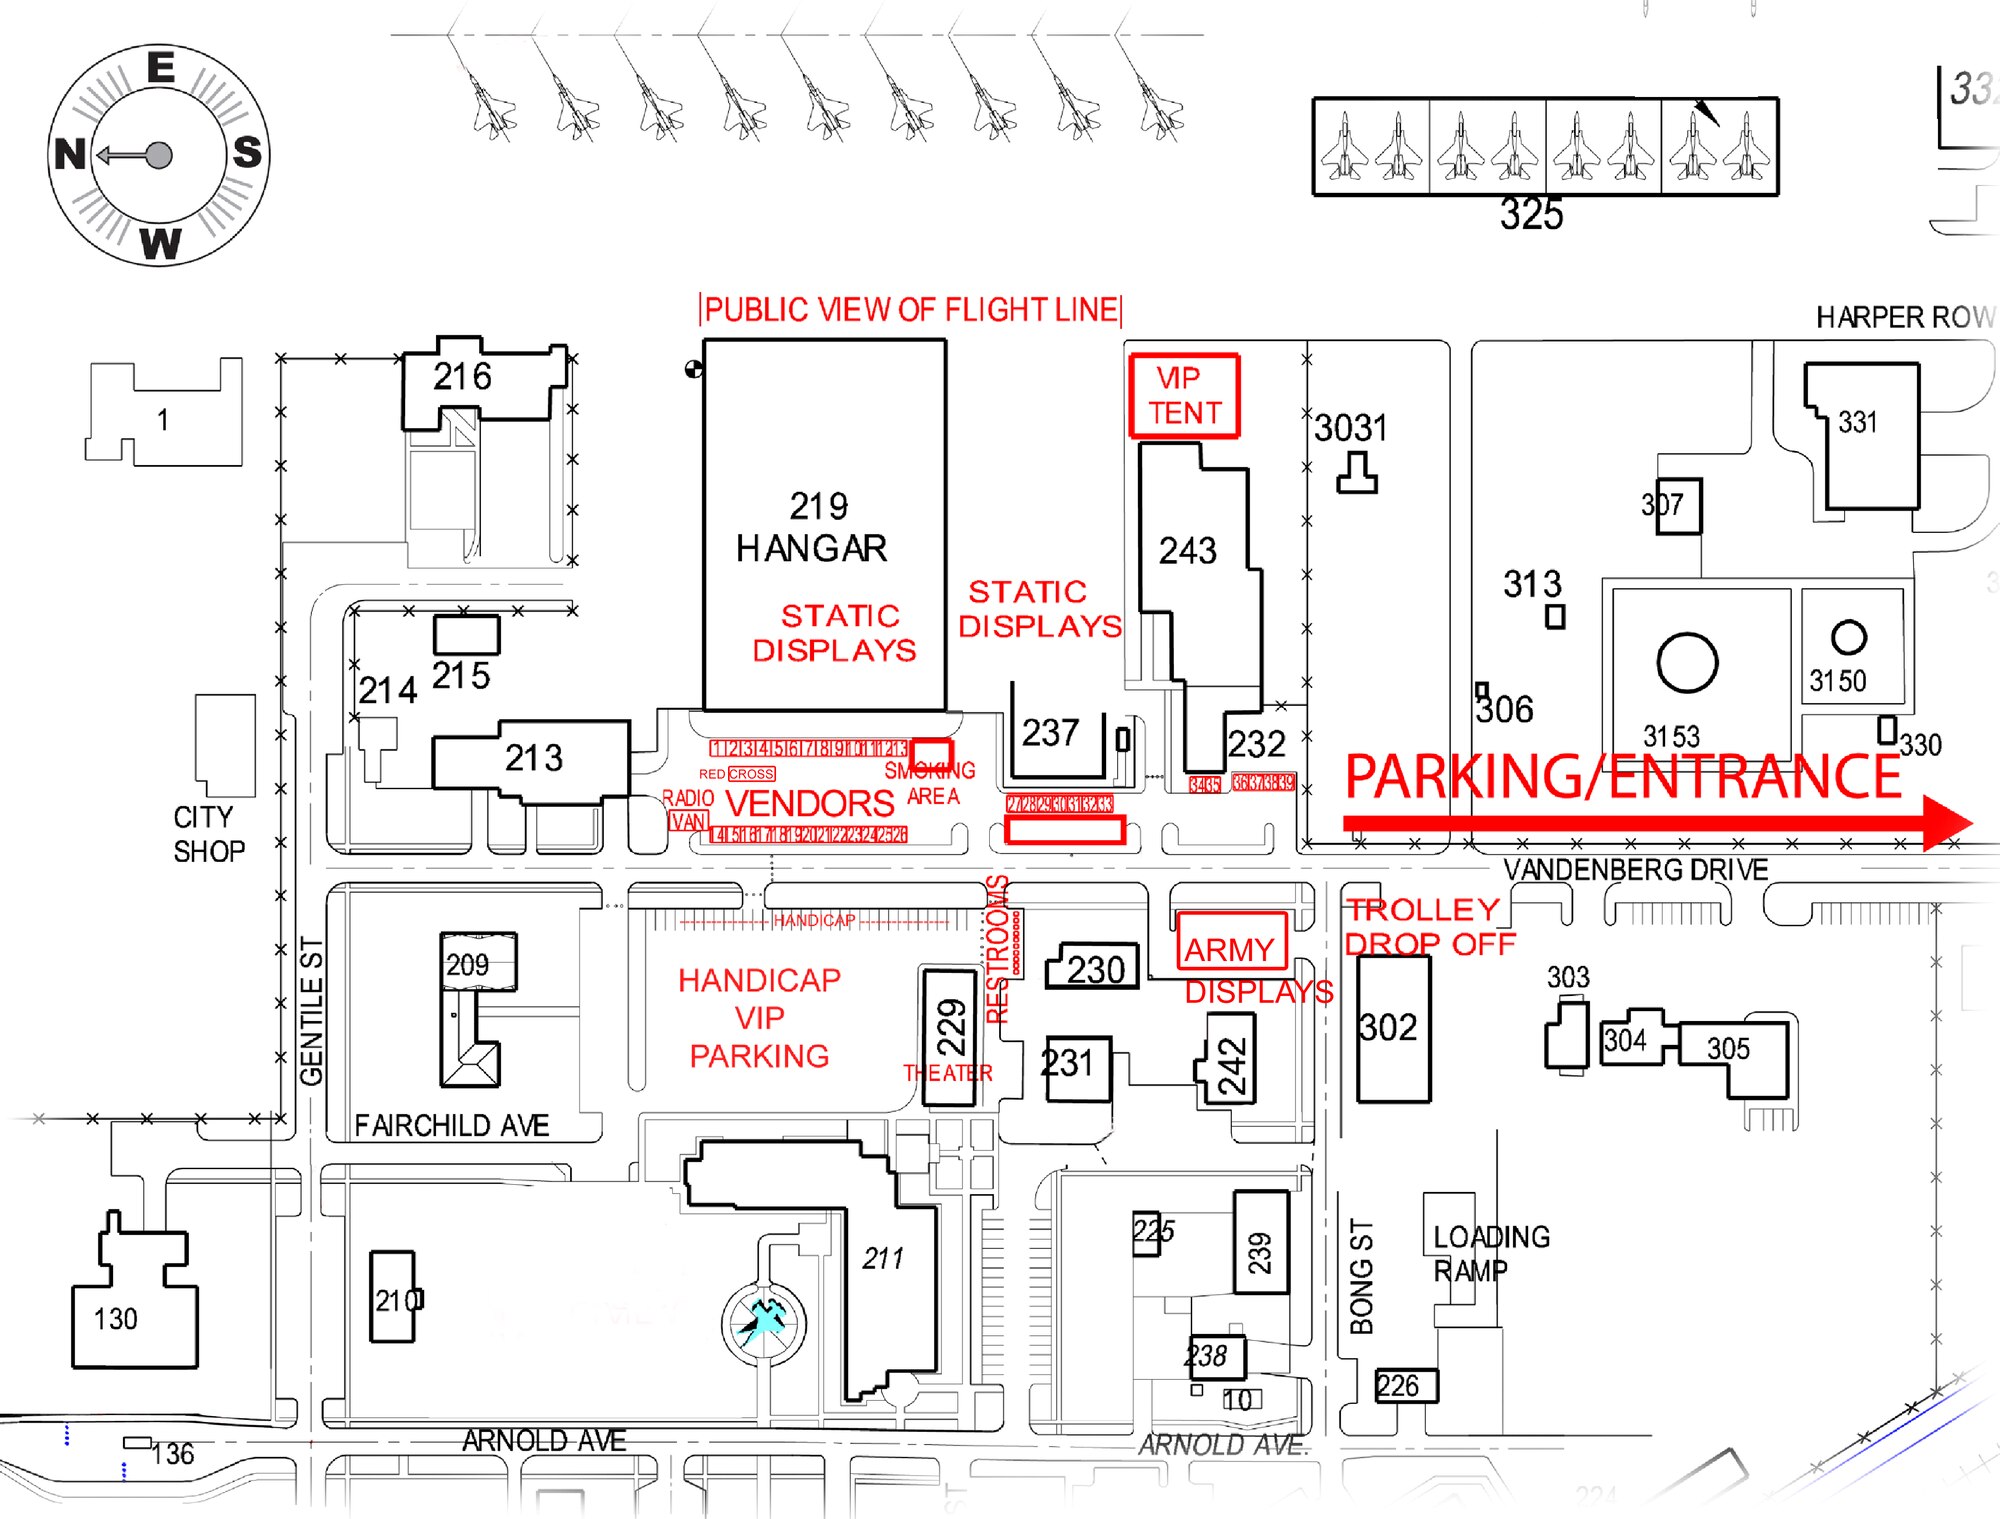 Here is the event map for the Open House July 23, 2011 at Kingsley Field, Klamath Falls, Ore.